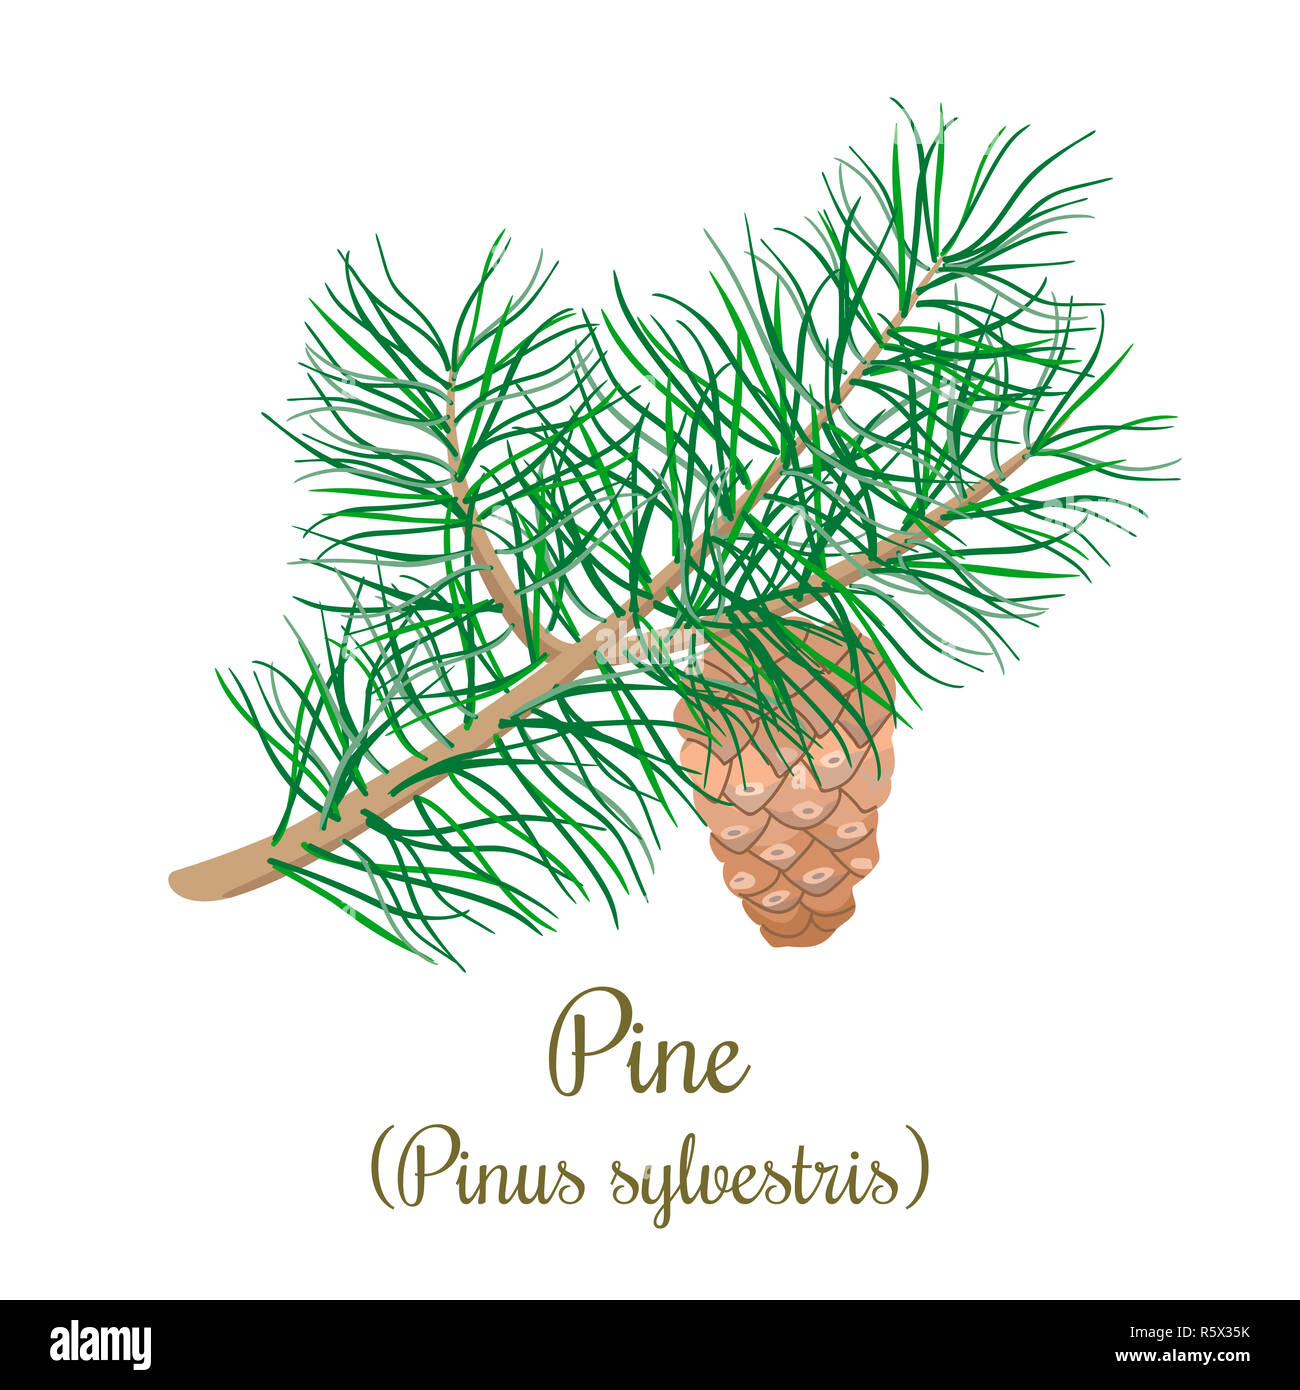 Pine tree twig with a cone. Green Branch of Pinus sylvestris Stock Photo